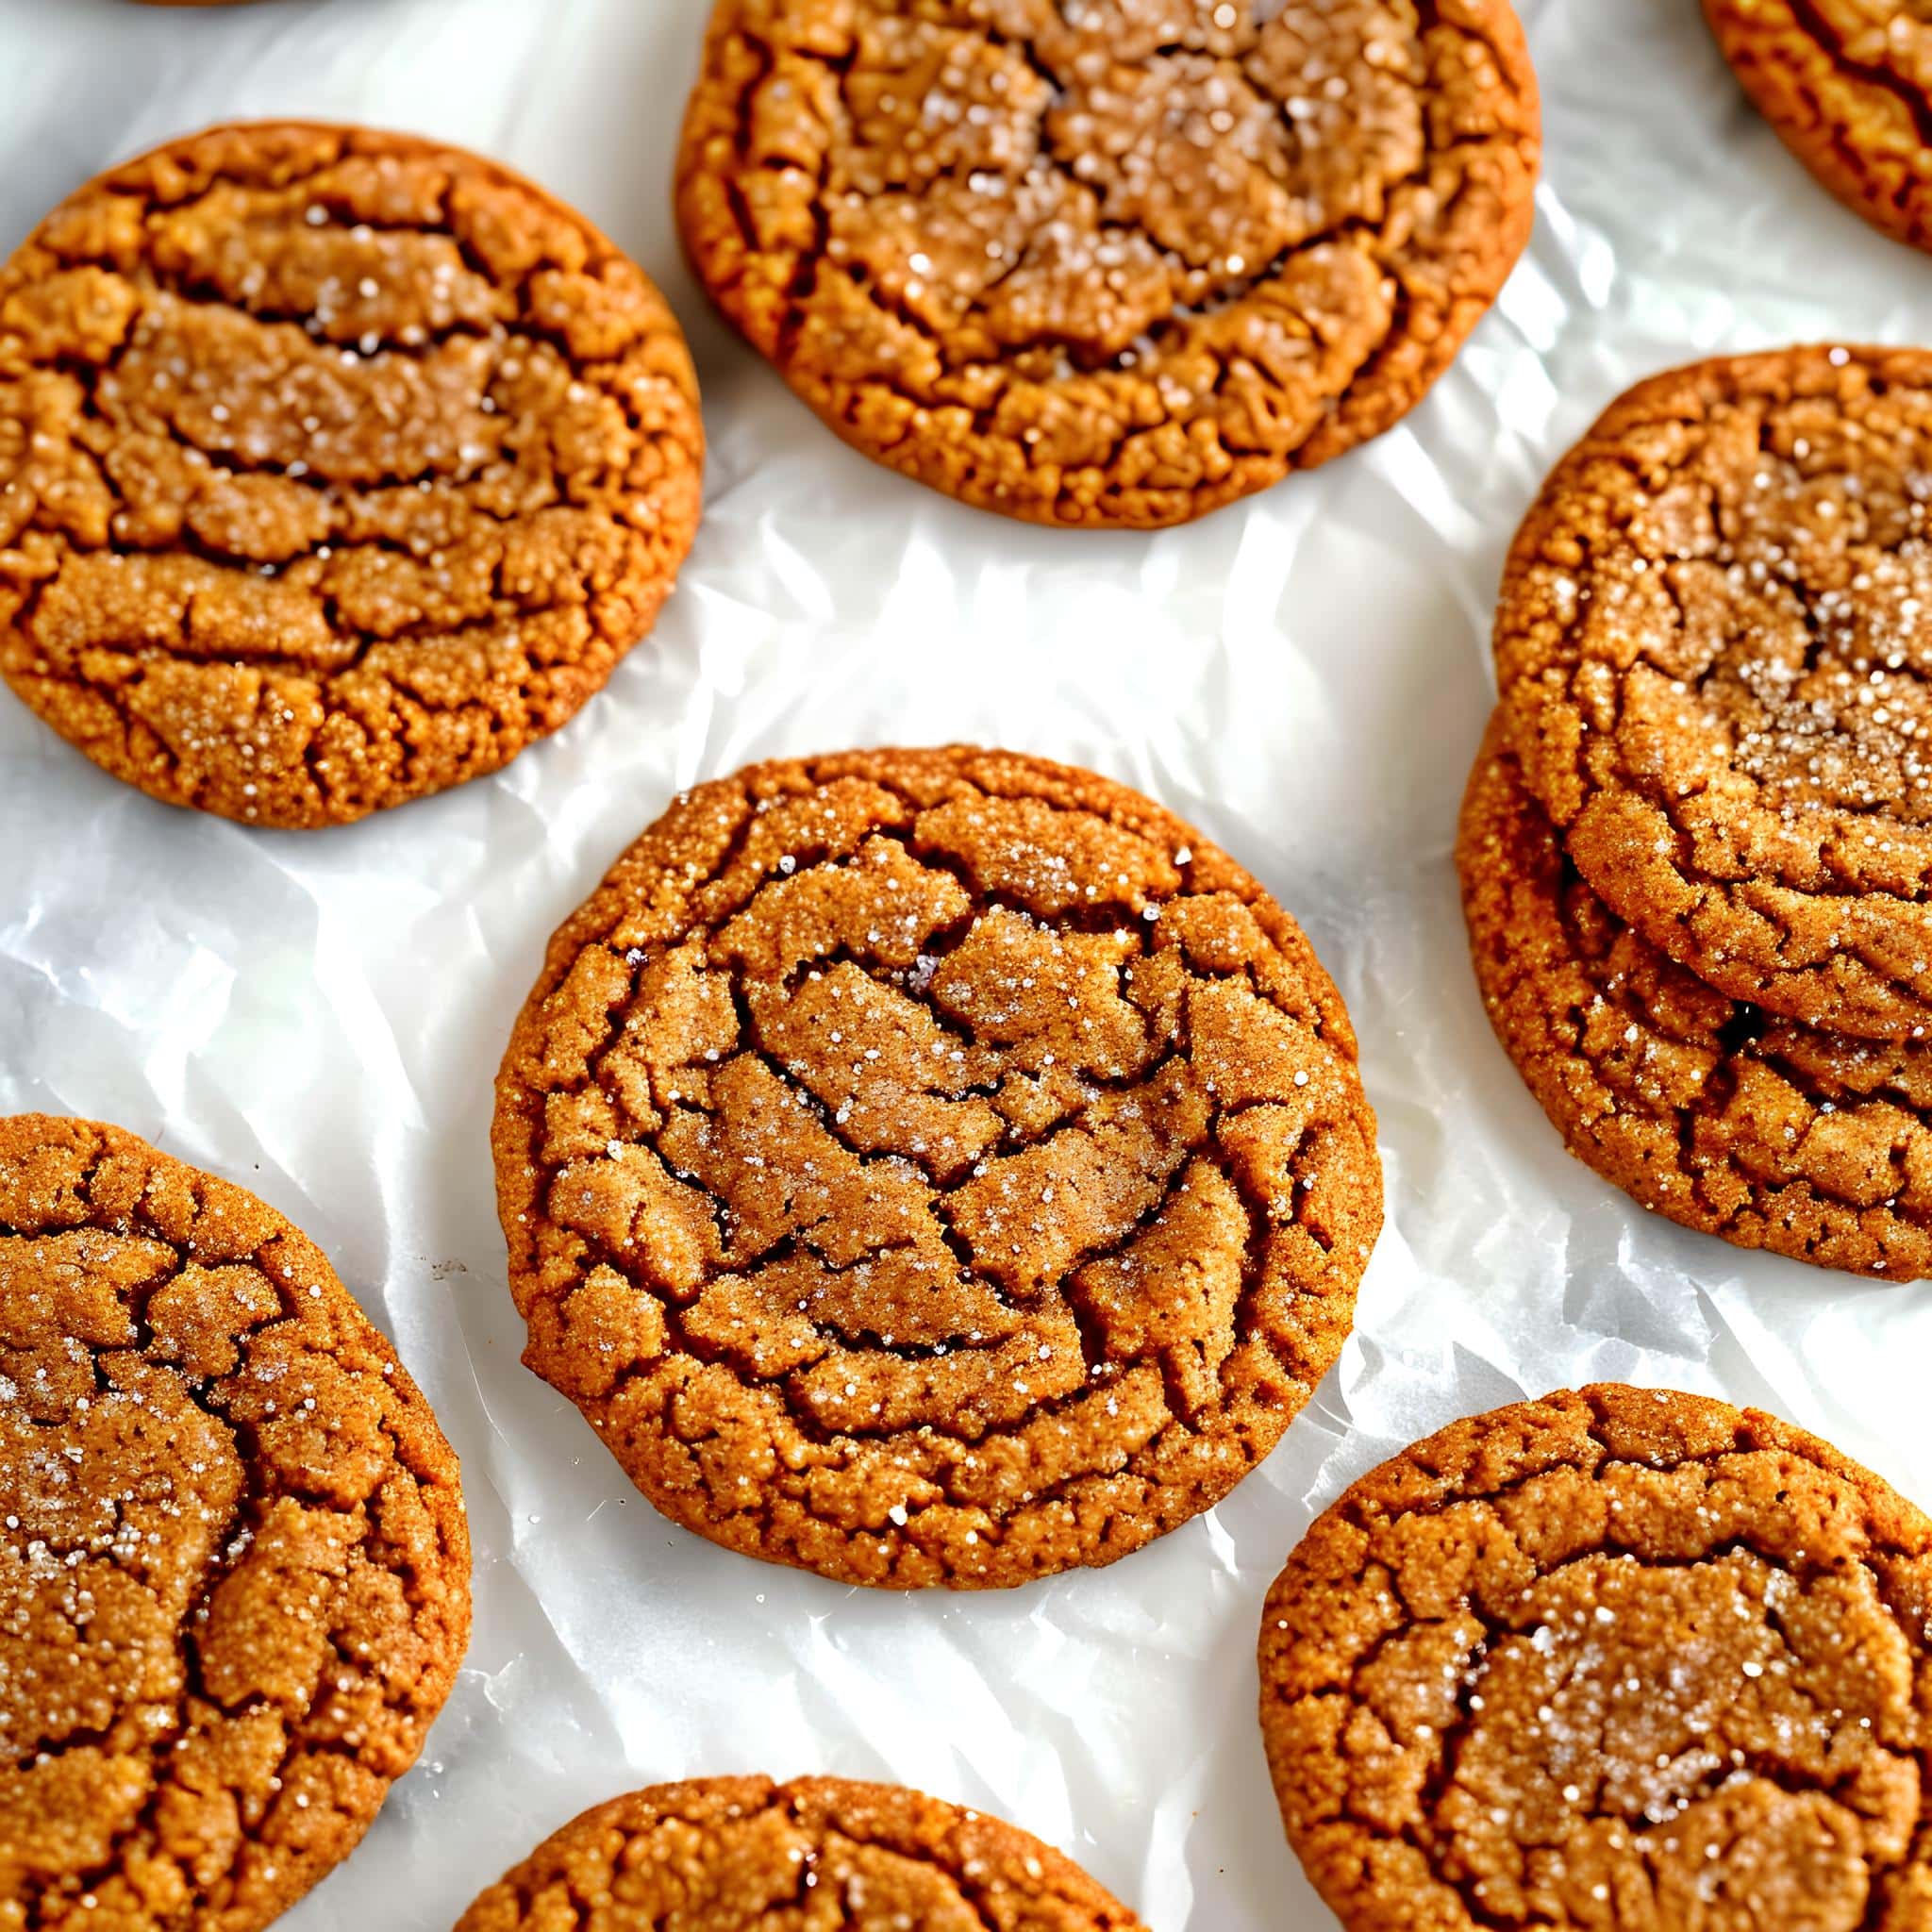 A close-up of a ginger cookies, showcasing its texture and the sprinkled sugar on top.